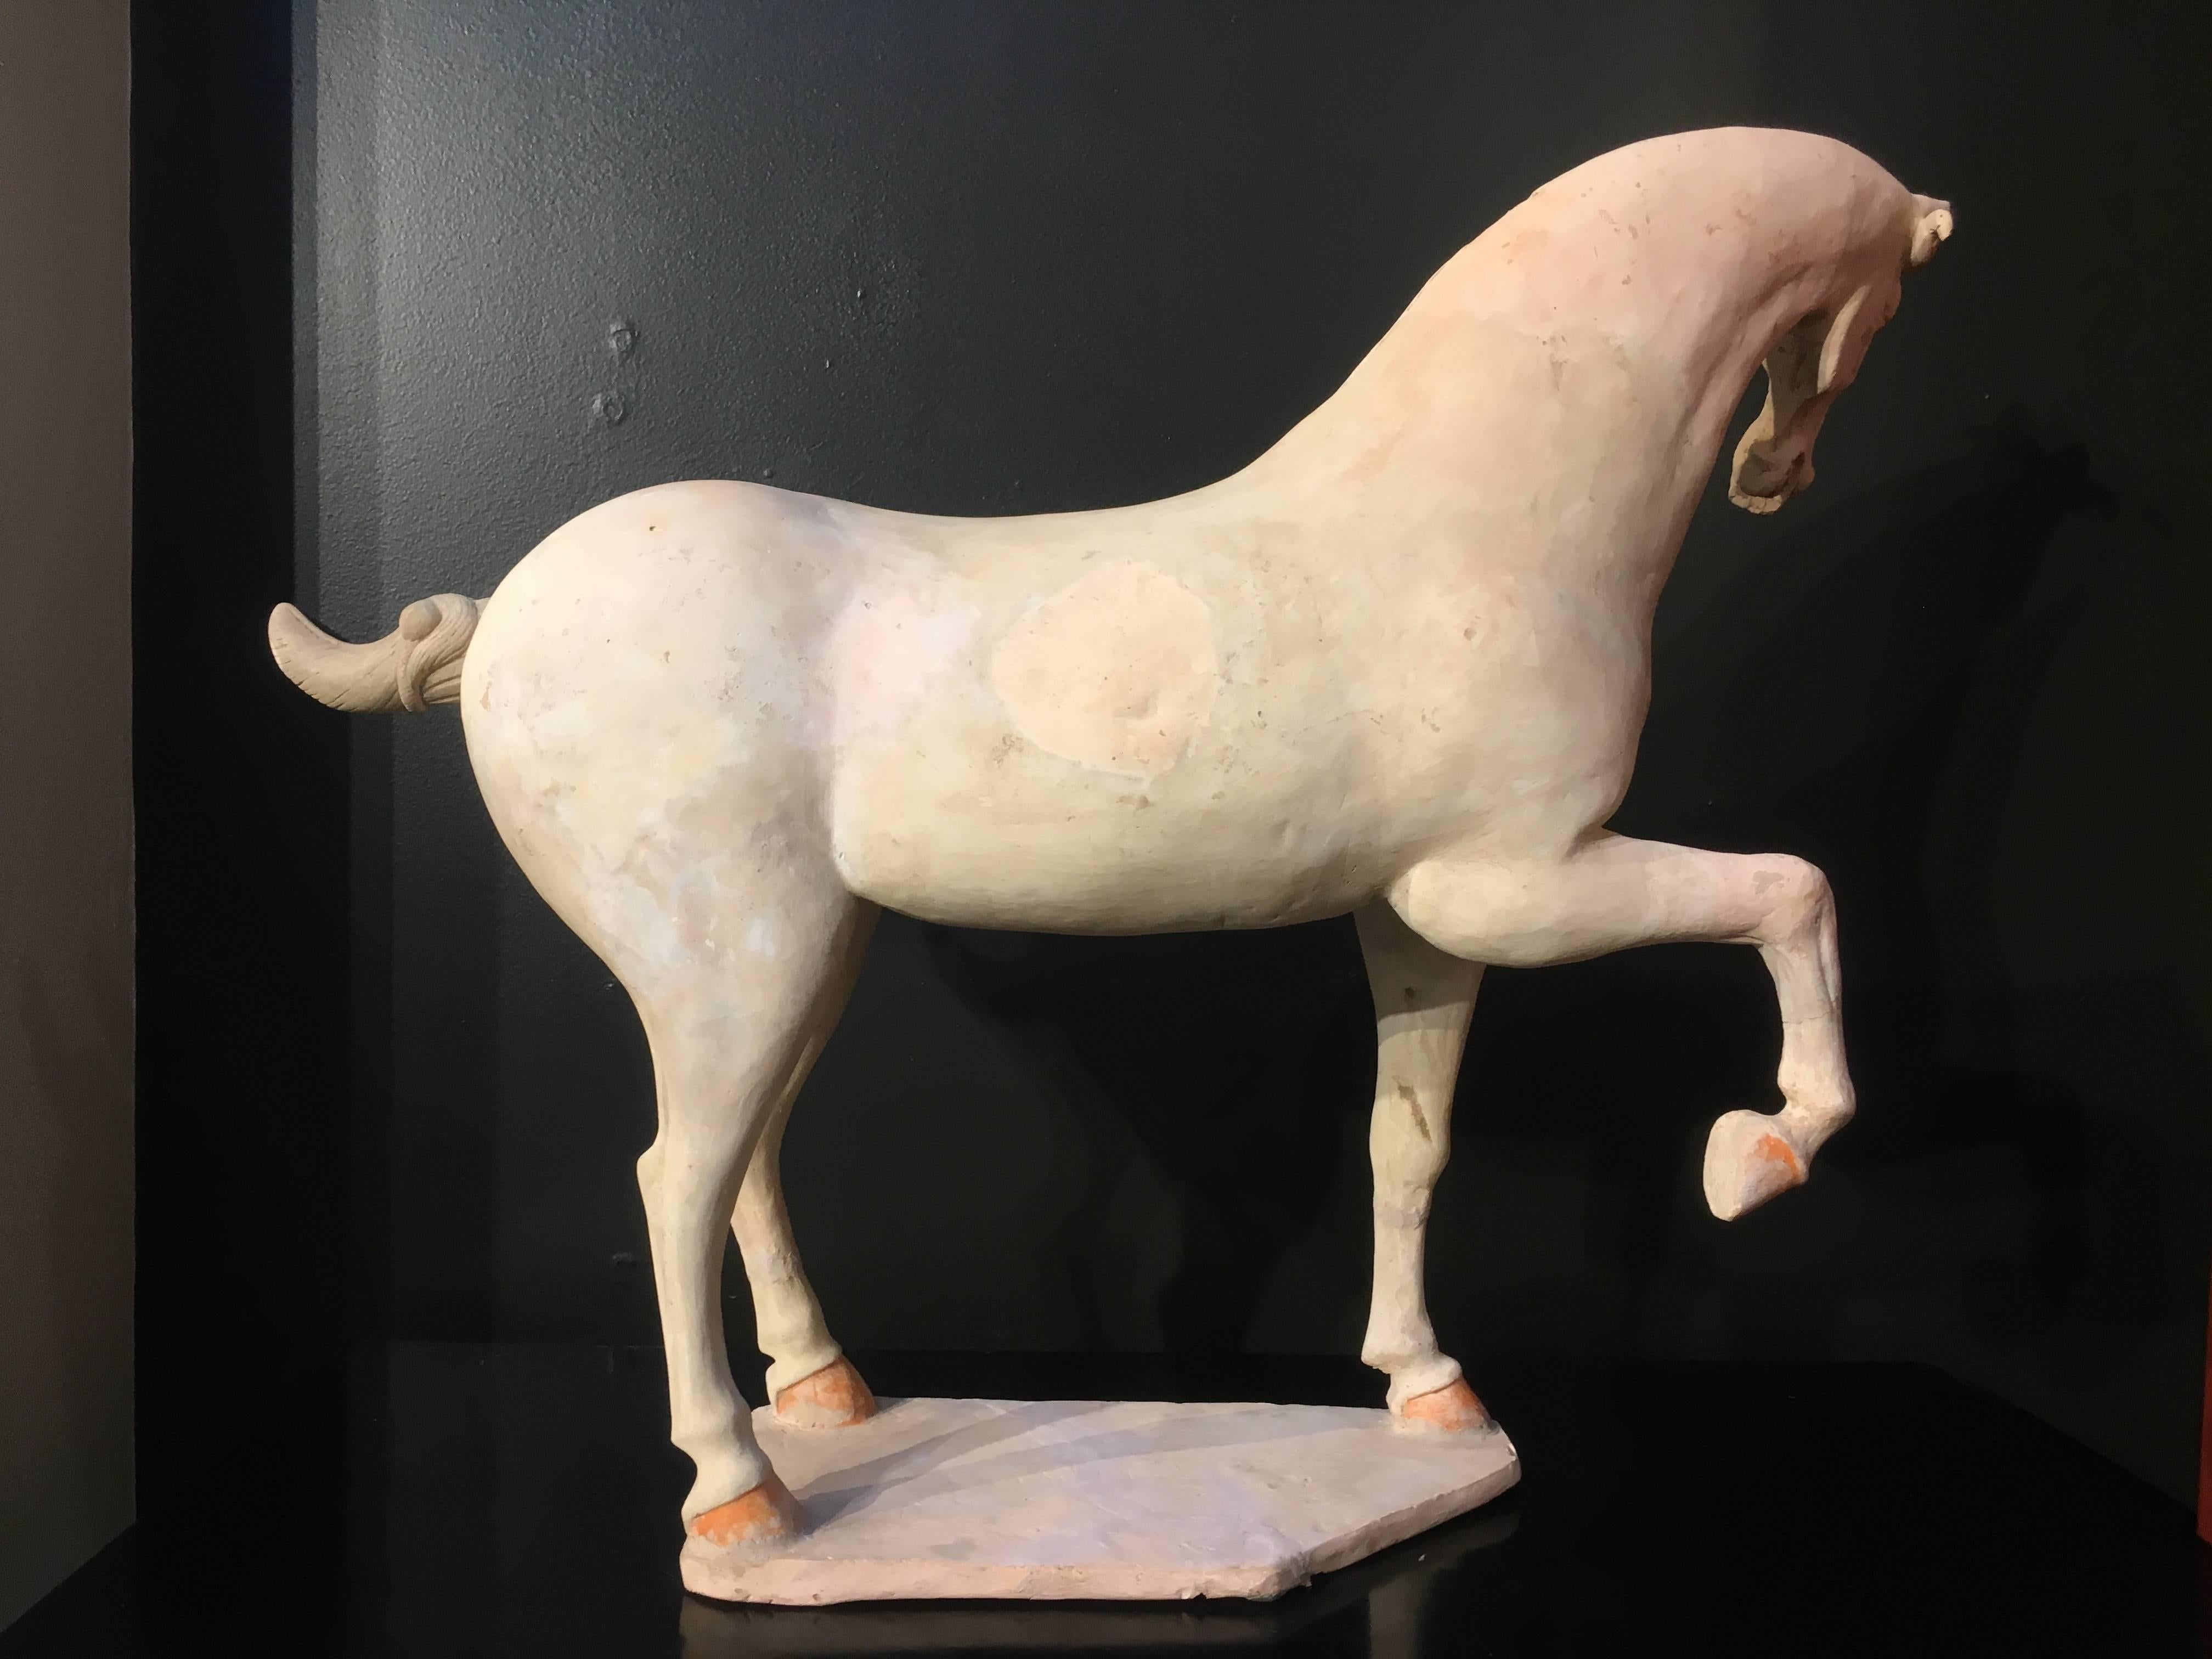 A magnificent and large early Tang dynasty (618-906 AD) model of a prancing or dancing horse, circa 7th century.
The majestic animal is caught mid-motion, one leg raised, head gracefully turned, standing on a plinth. The body is elegantly